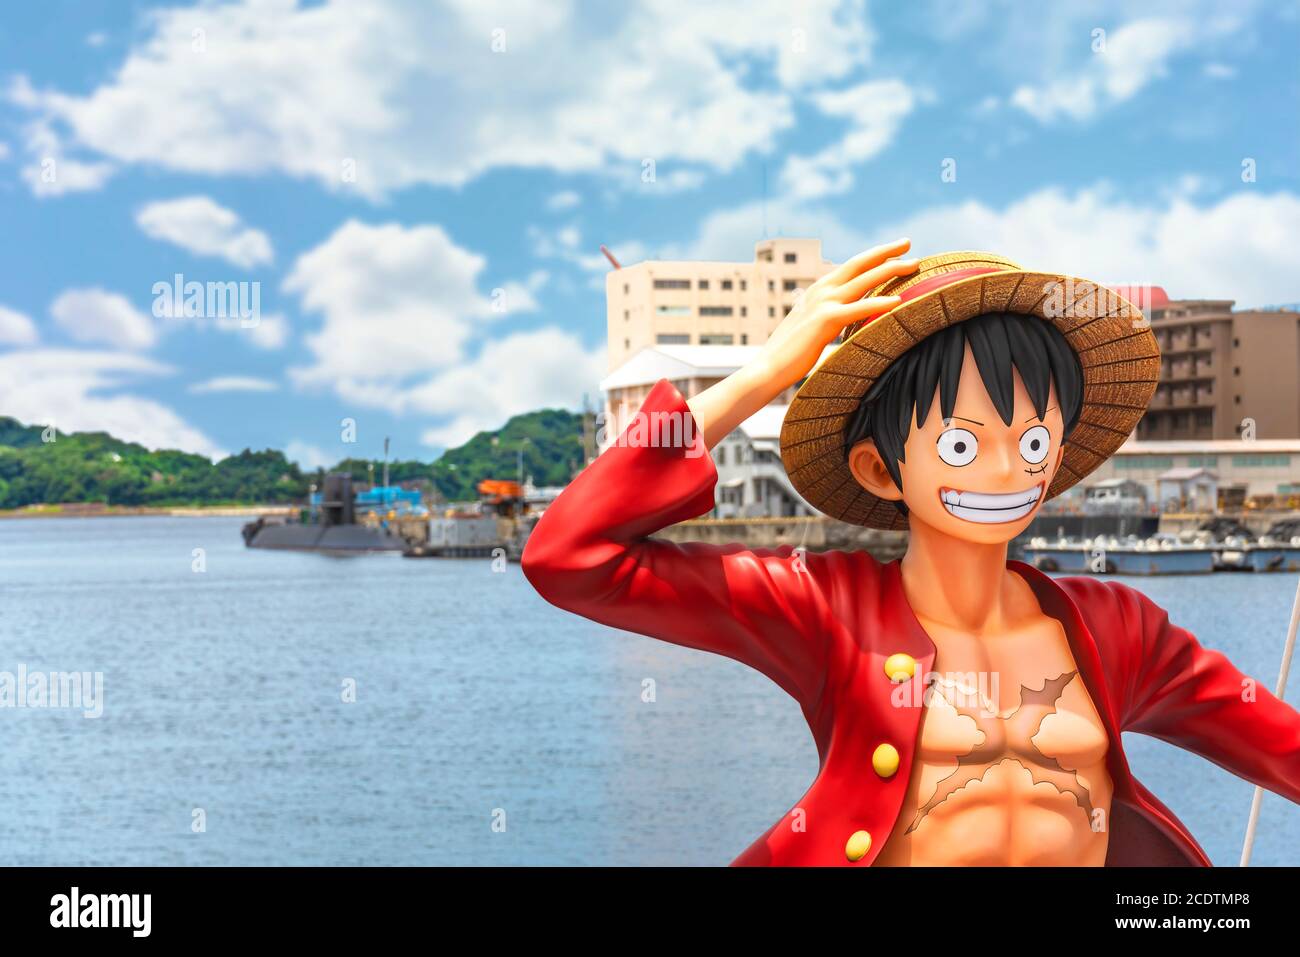 kanagawa, japan - july 19 2020: Close-up on the bust of the real size figurine of the hero Monkey D. Luffy from the manga One Piece by Eiichiro Oda on Stock Photo